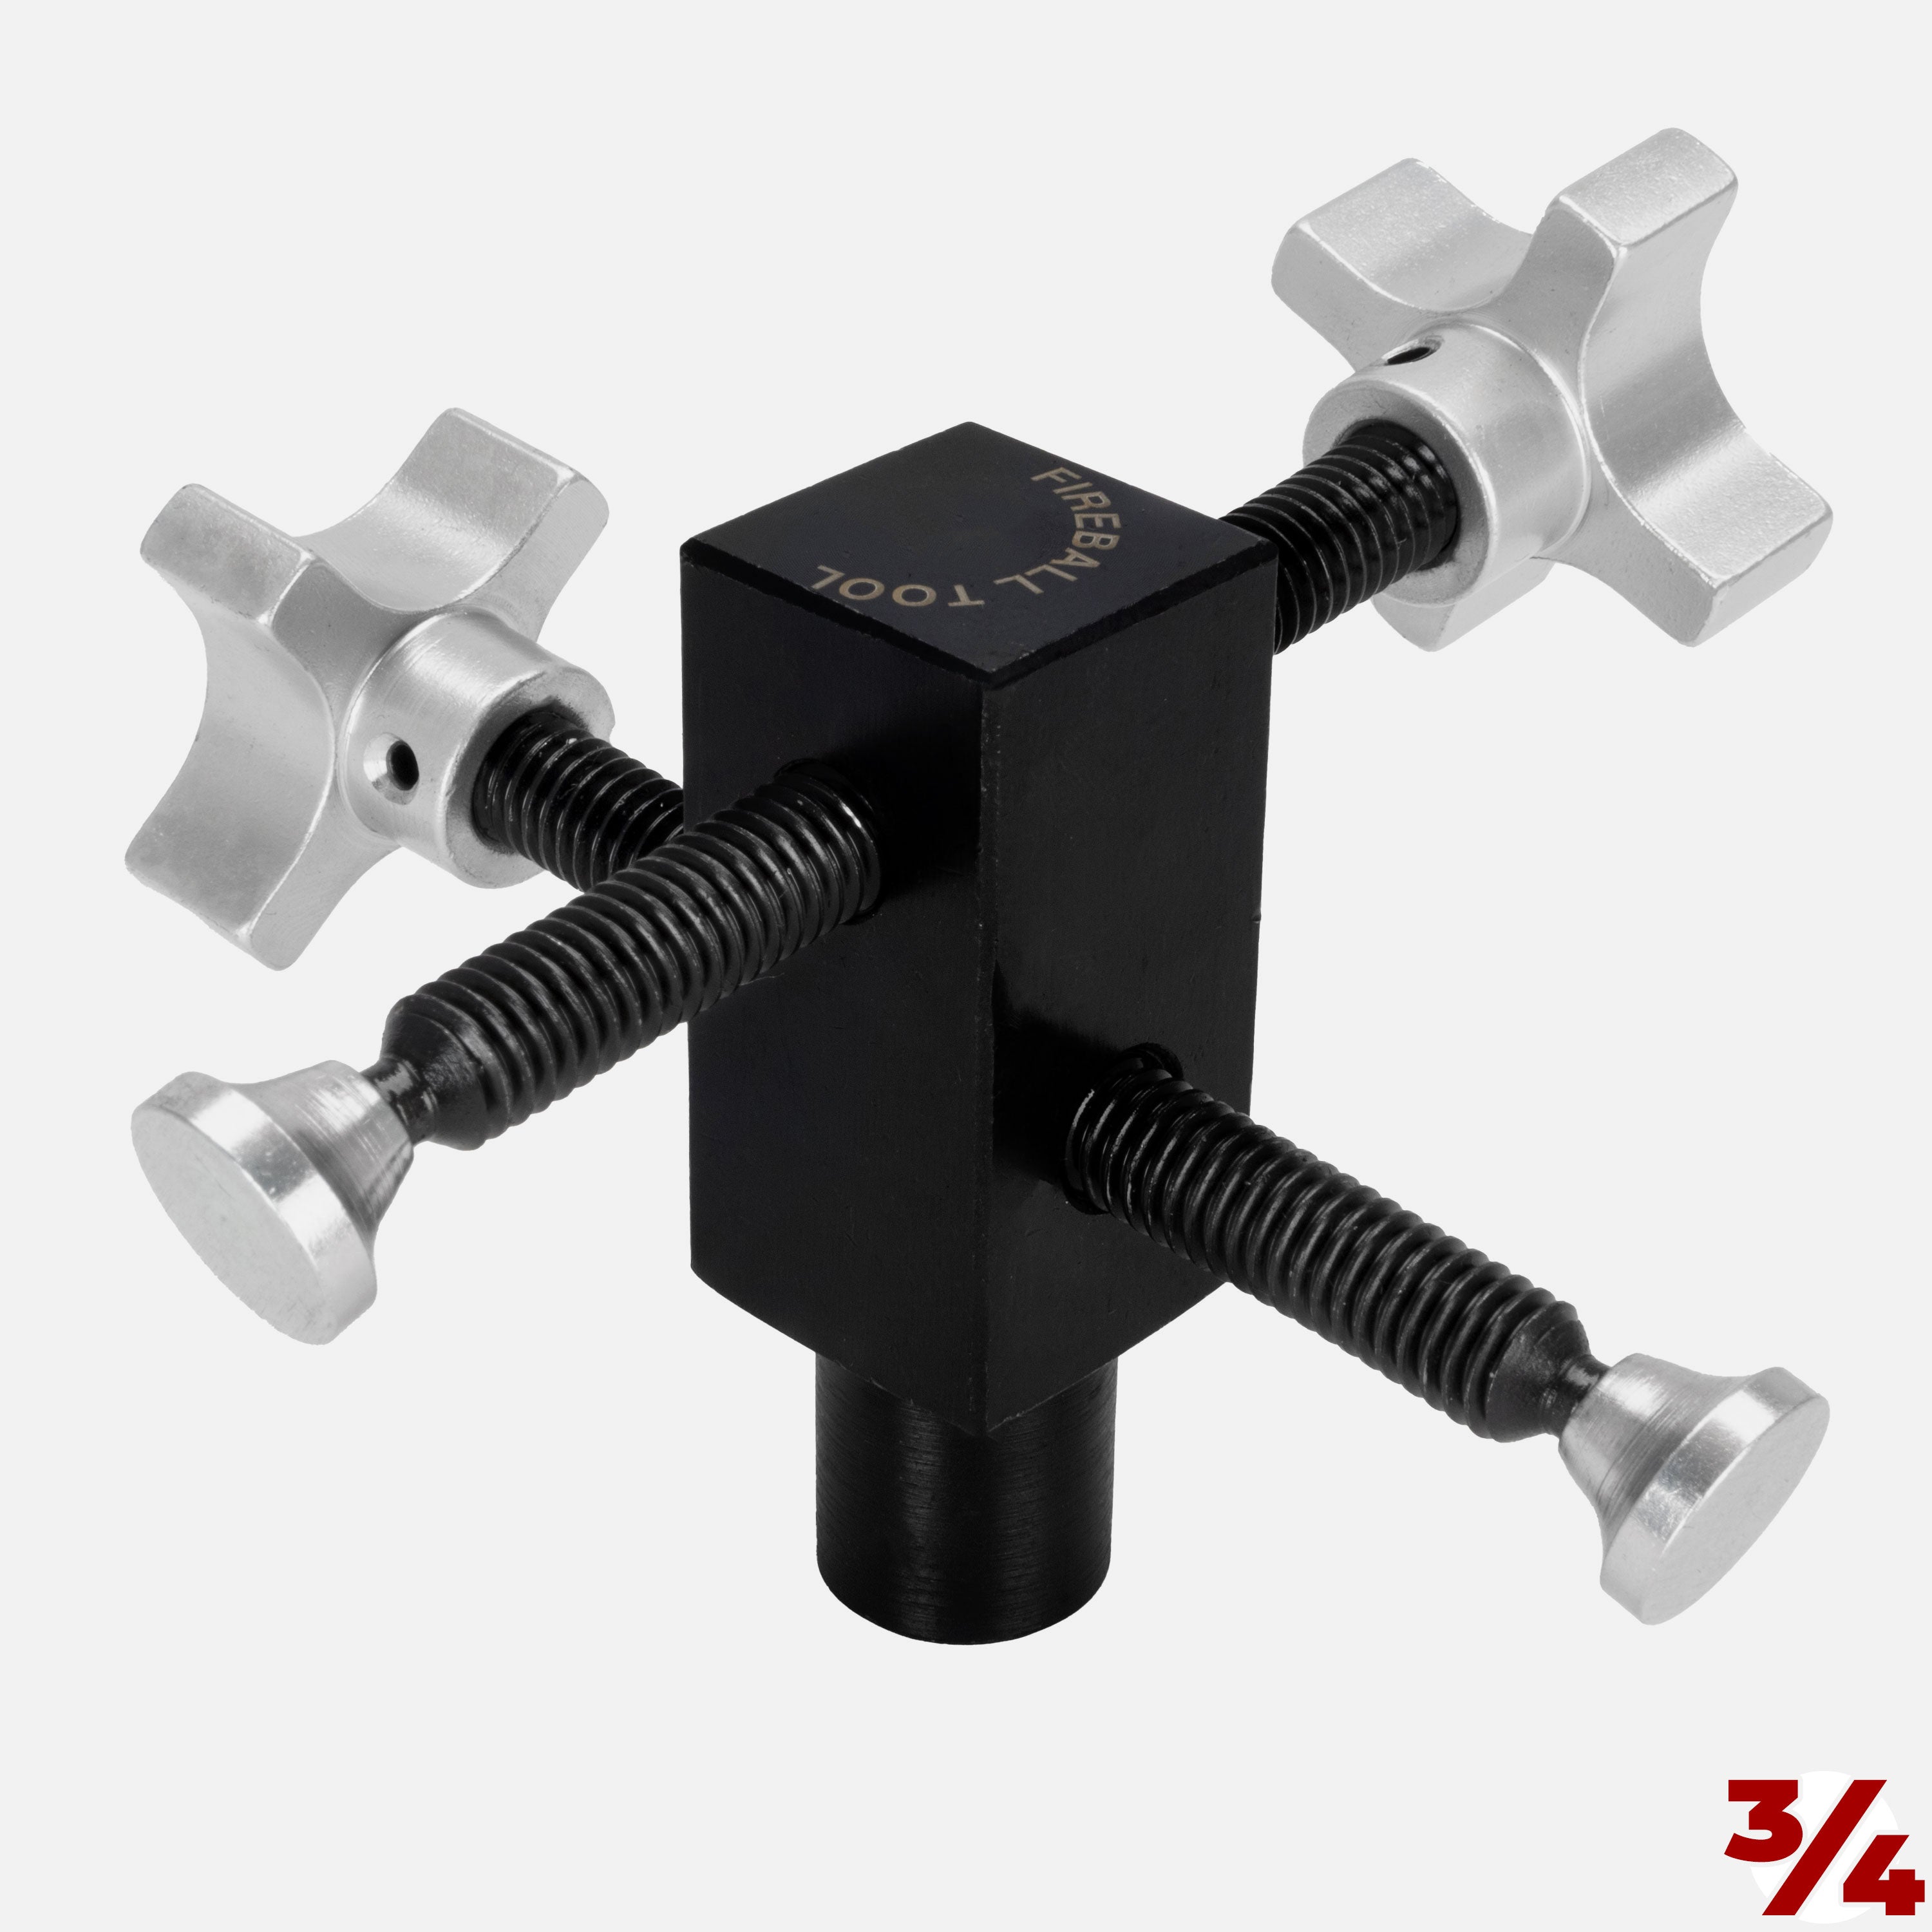 Side Push Clamp [3/4" System]